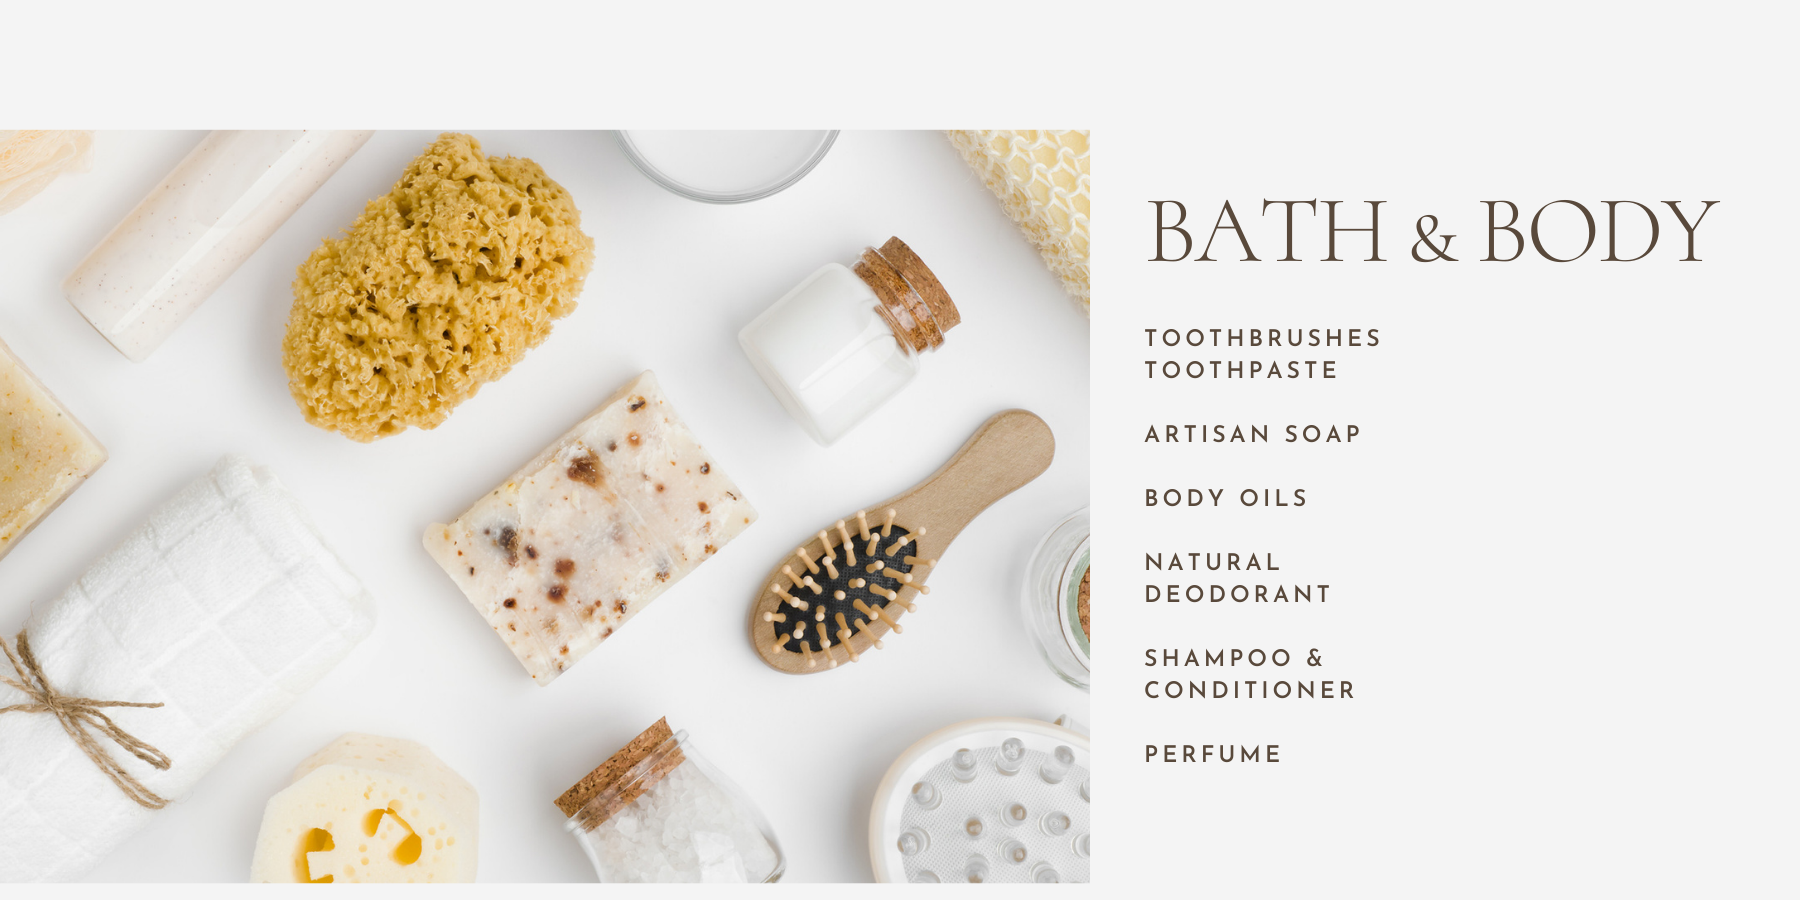 Soothing all-natural bath & body products.  Choose from our carefully curated range of organic bath, beauty, and skincare products. 